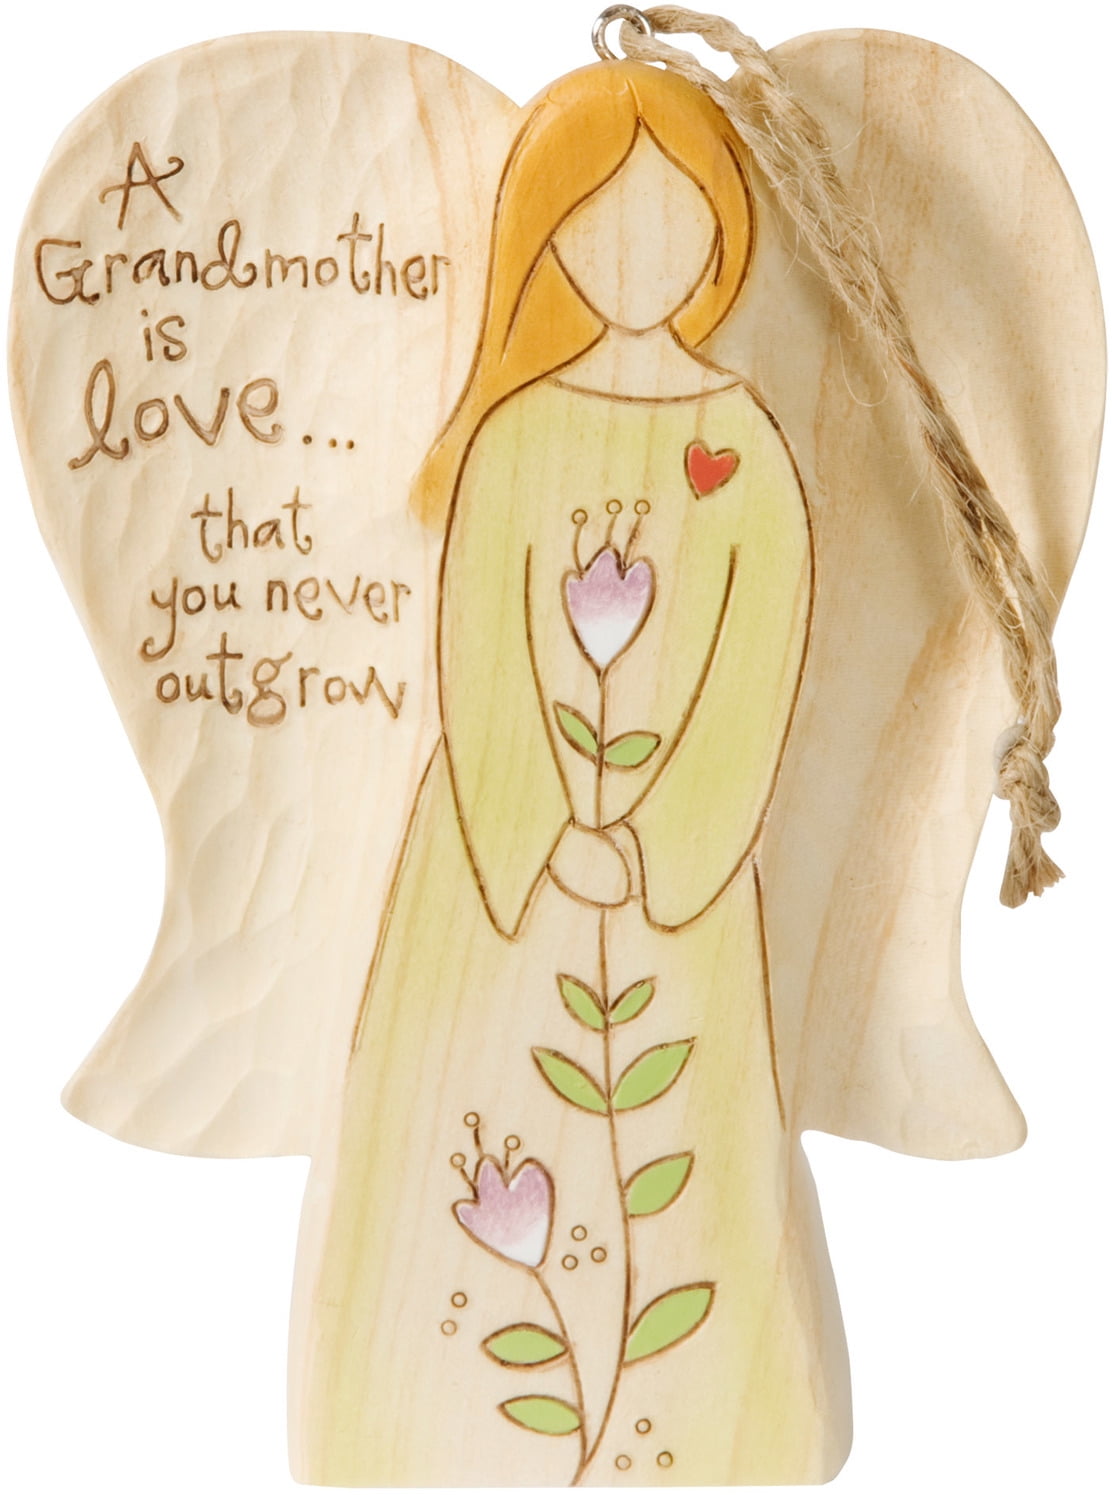 Pavilion 4.5 Wooden Carved Angel Figurine Ornament Forever in Our Hearts Memorial in Memory Gifts Pavilion Gift Company 78018